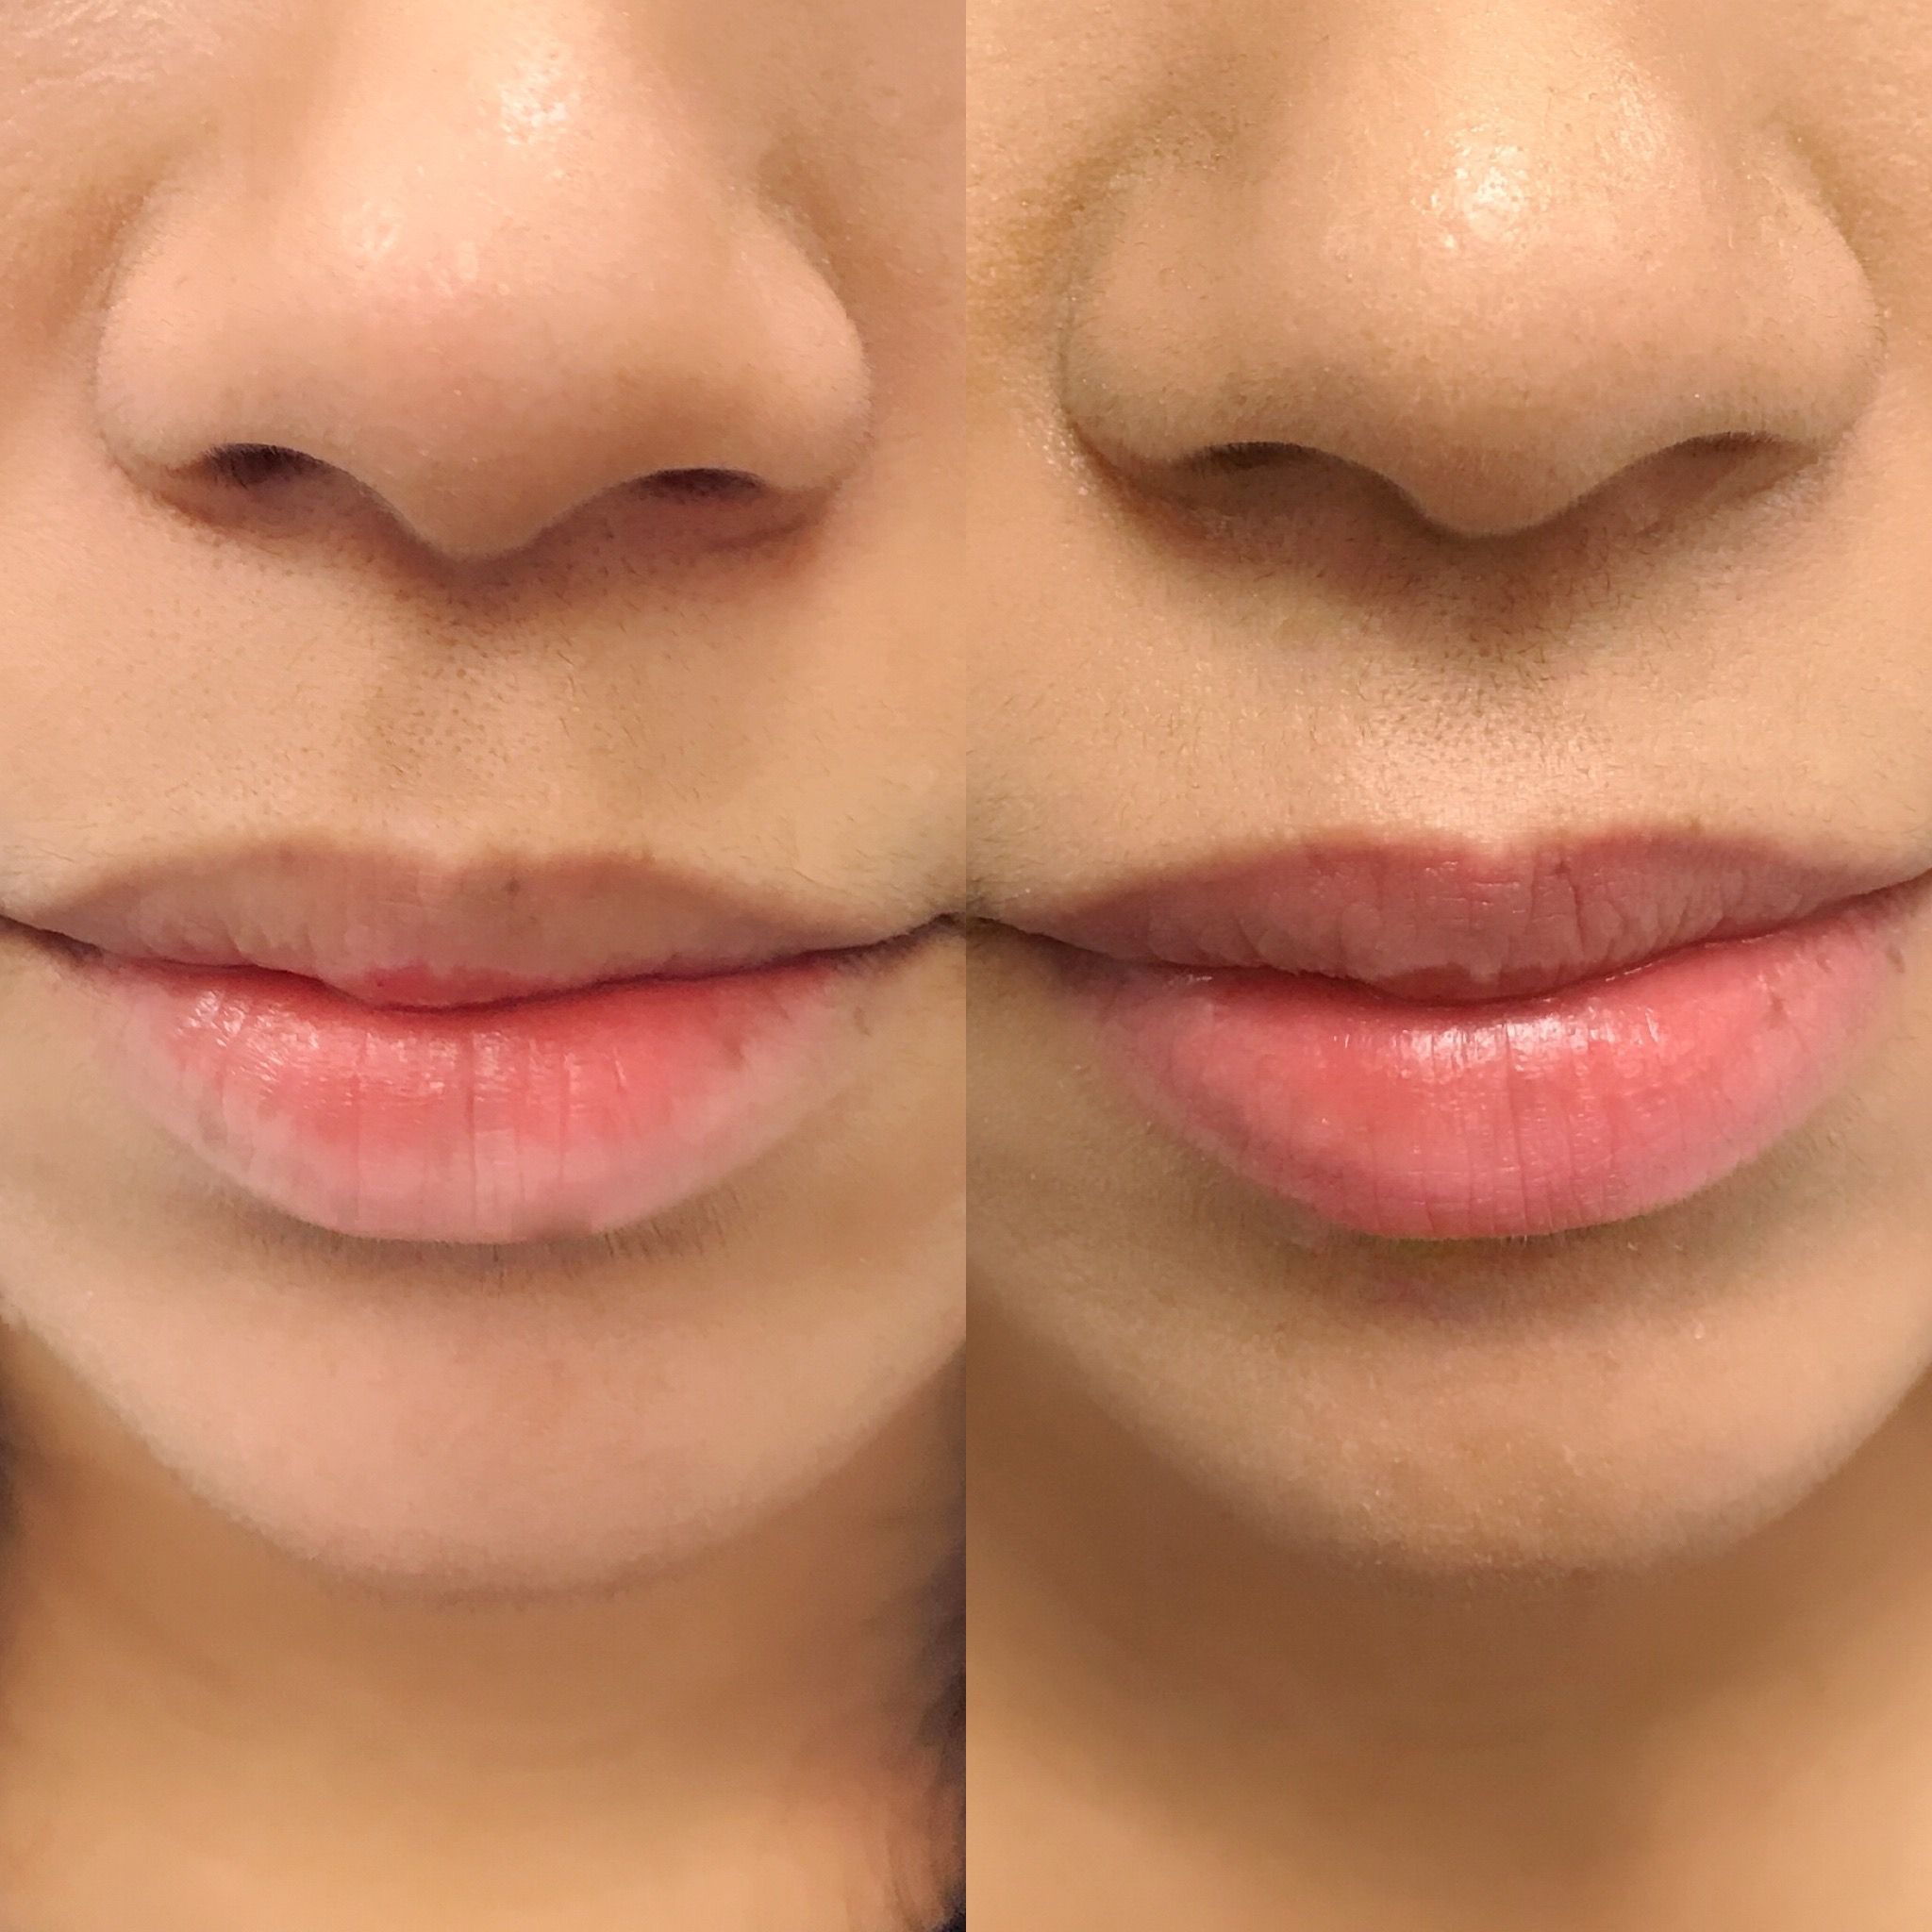 Before and after healed lip blush